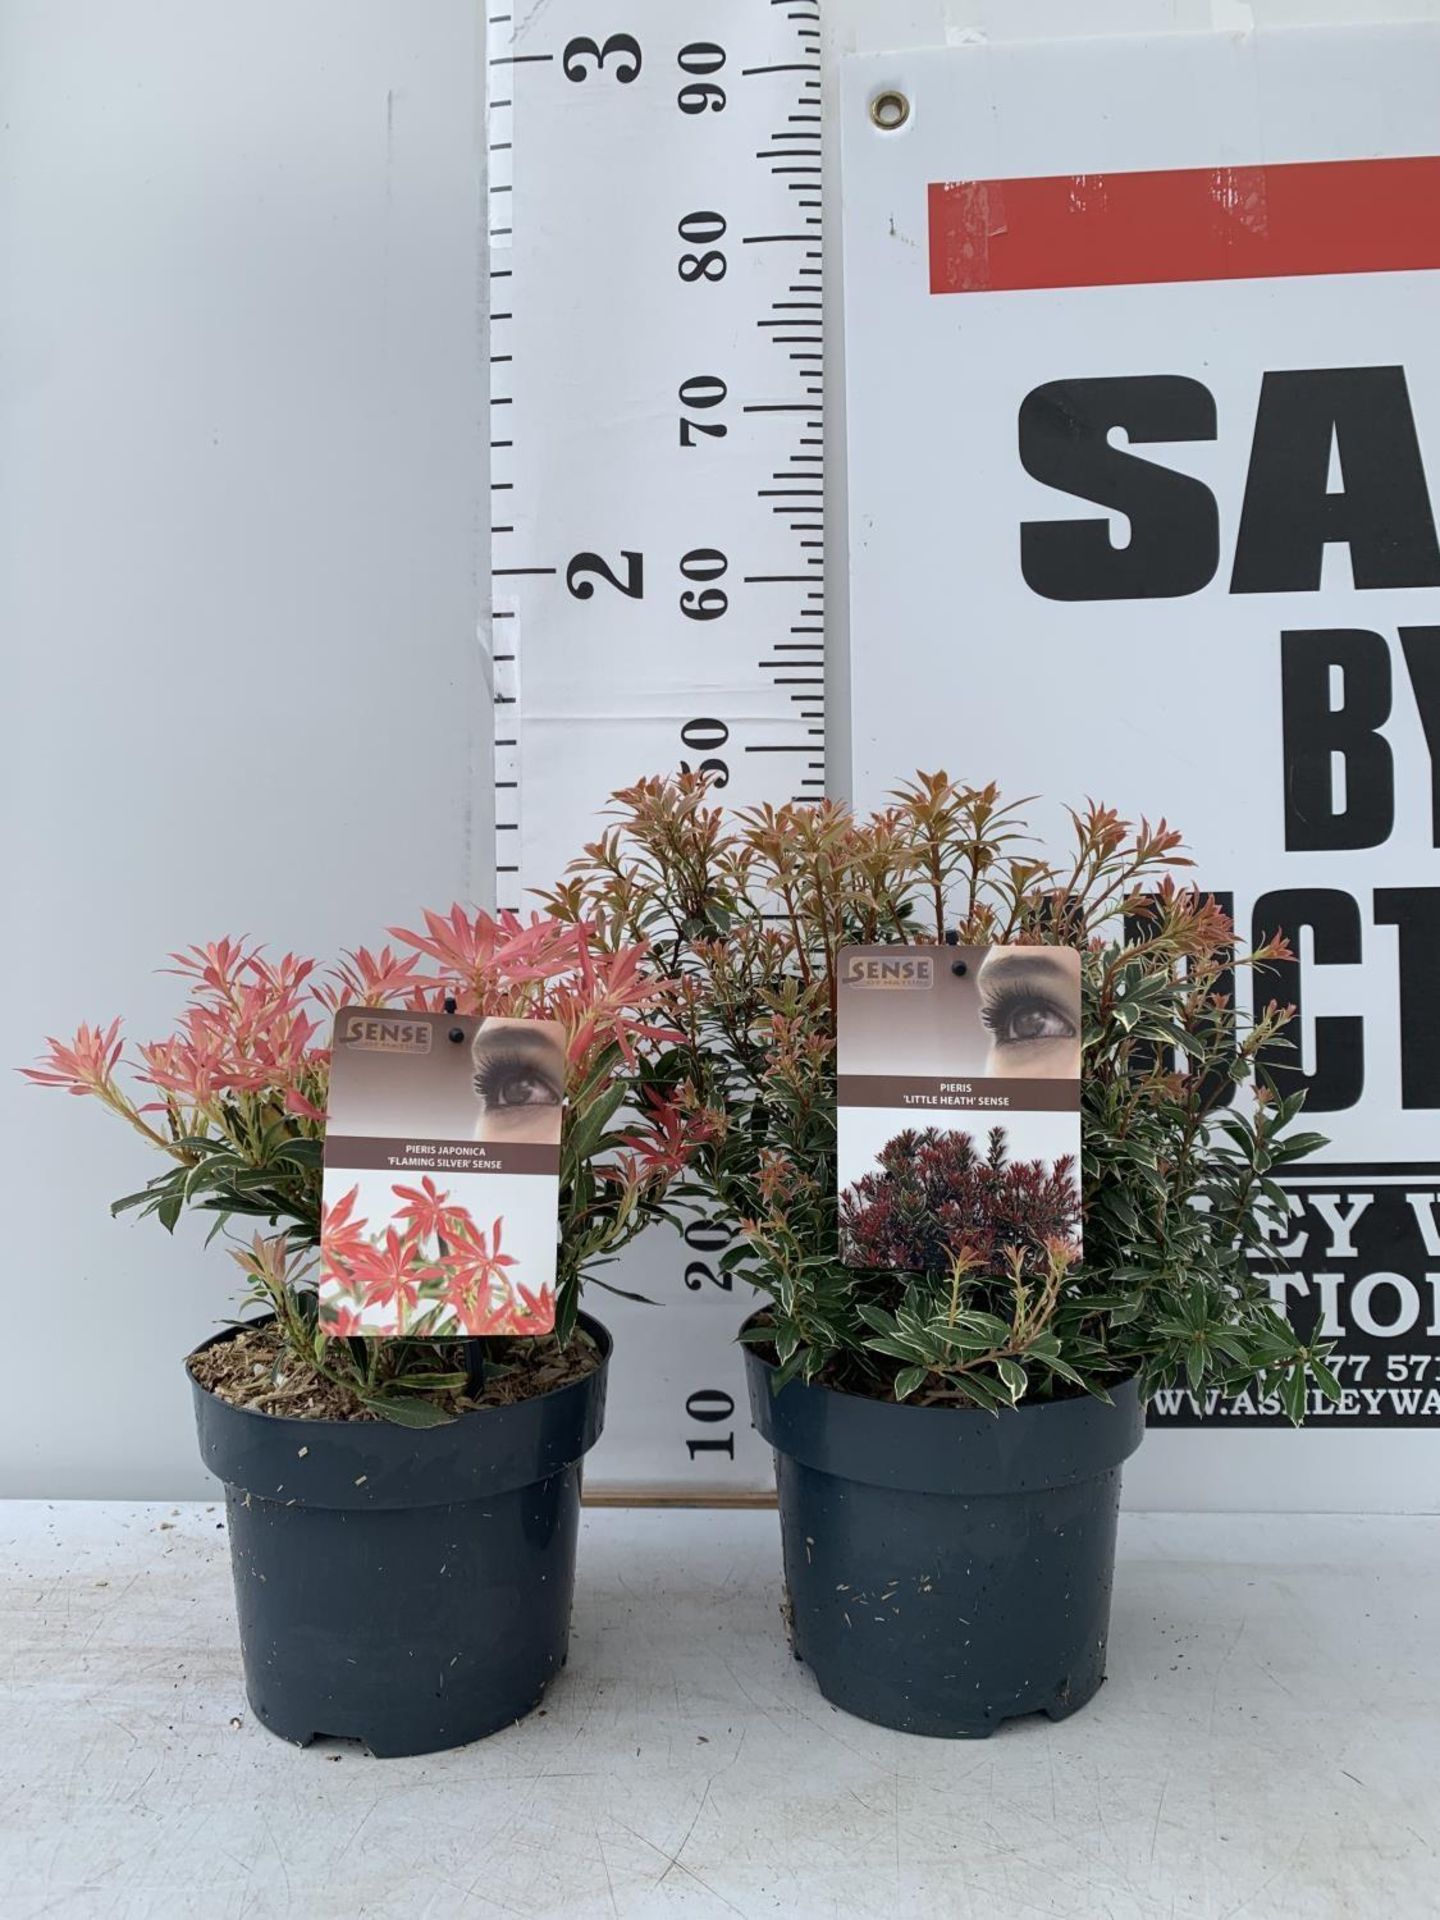 TWO PIERIS JAPONICA LITTLE HEATH AND FLAMING SILVER IN 3 LTR POTS 45CM TALL PLUS VAT TO BE SOLD - Image 4 of 10